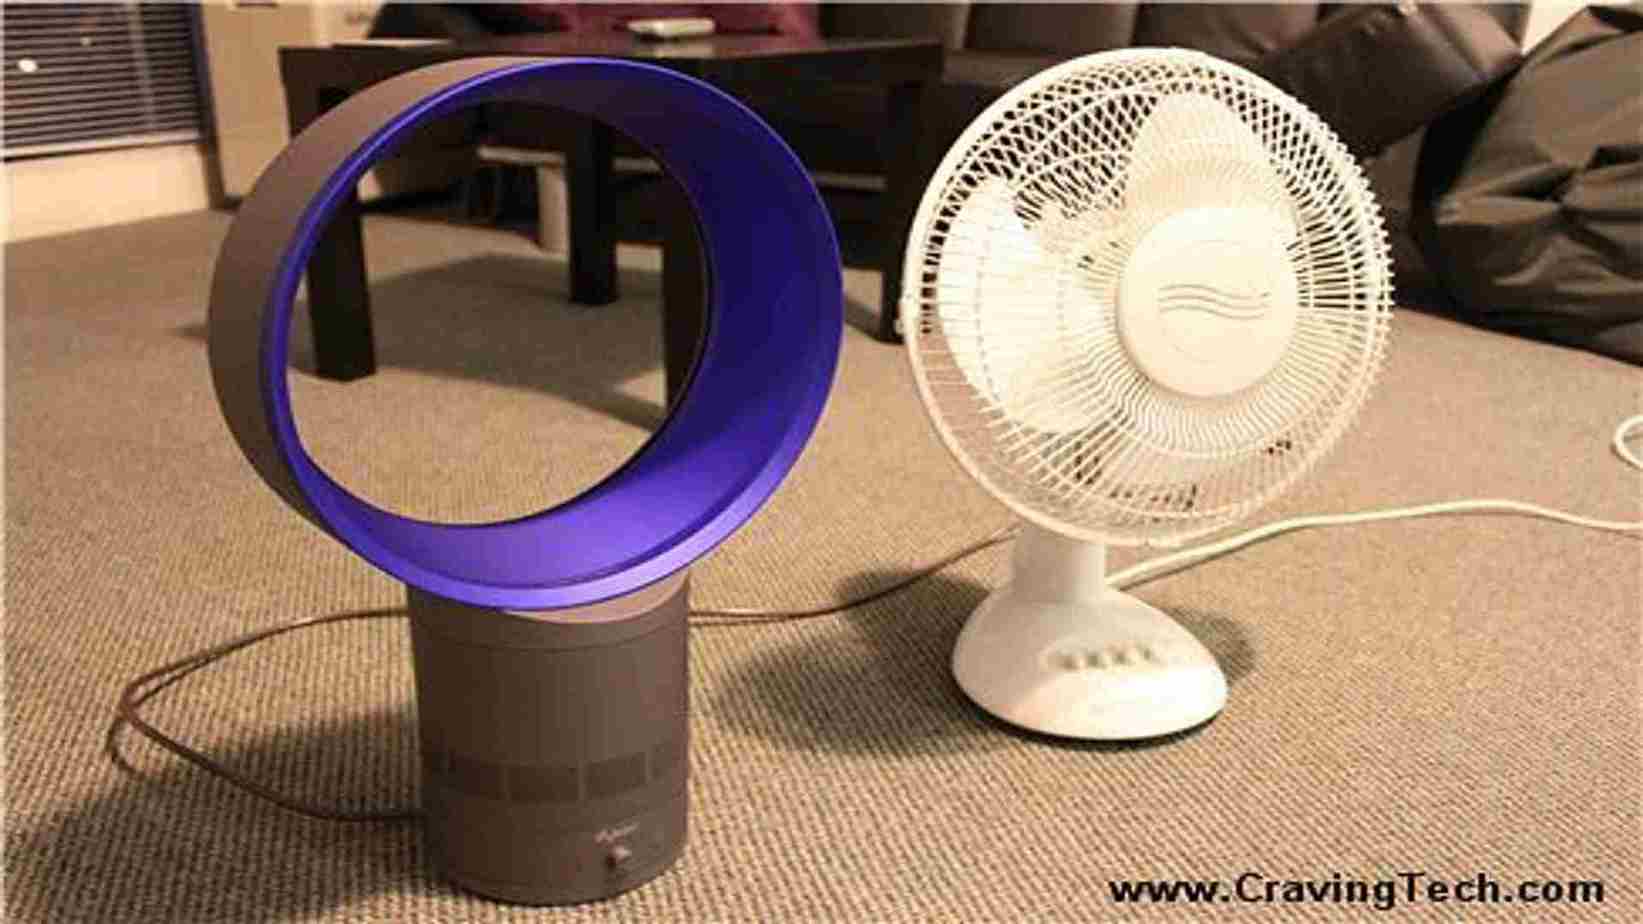 Why A Bladeless Fan Is Better Than A Conventional Fan – Pros And Cons